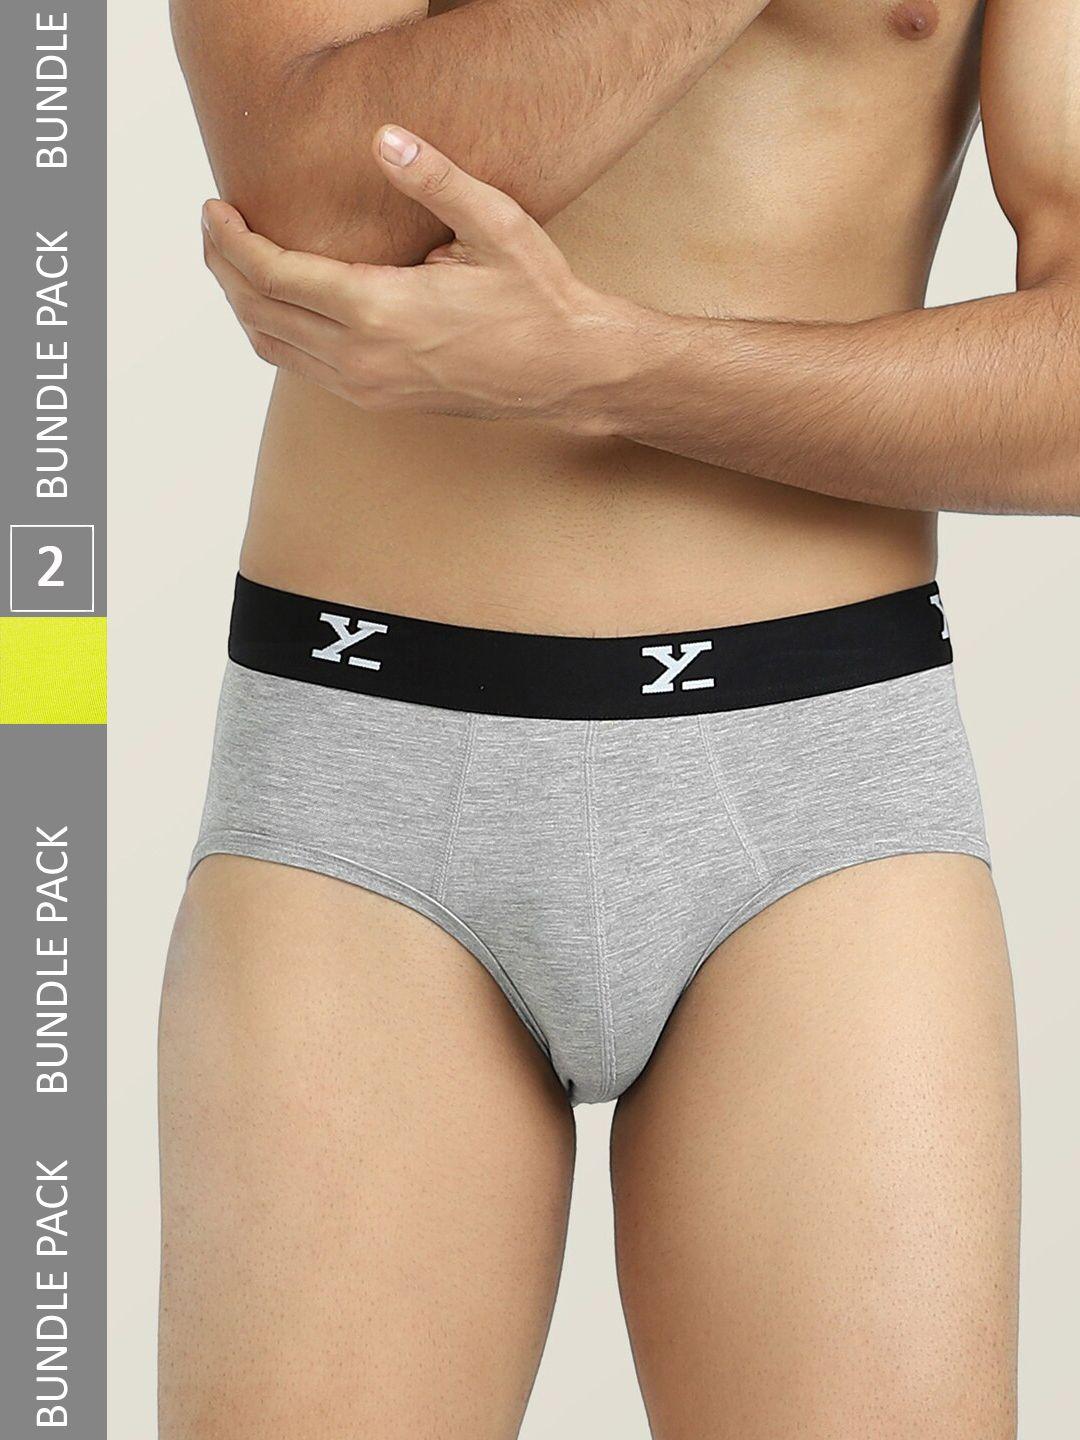 xyxx-men-pack-of-2-intellisoft-antimicrobial-micro-modal-dualist-briefs-xybrf2pckn602